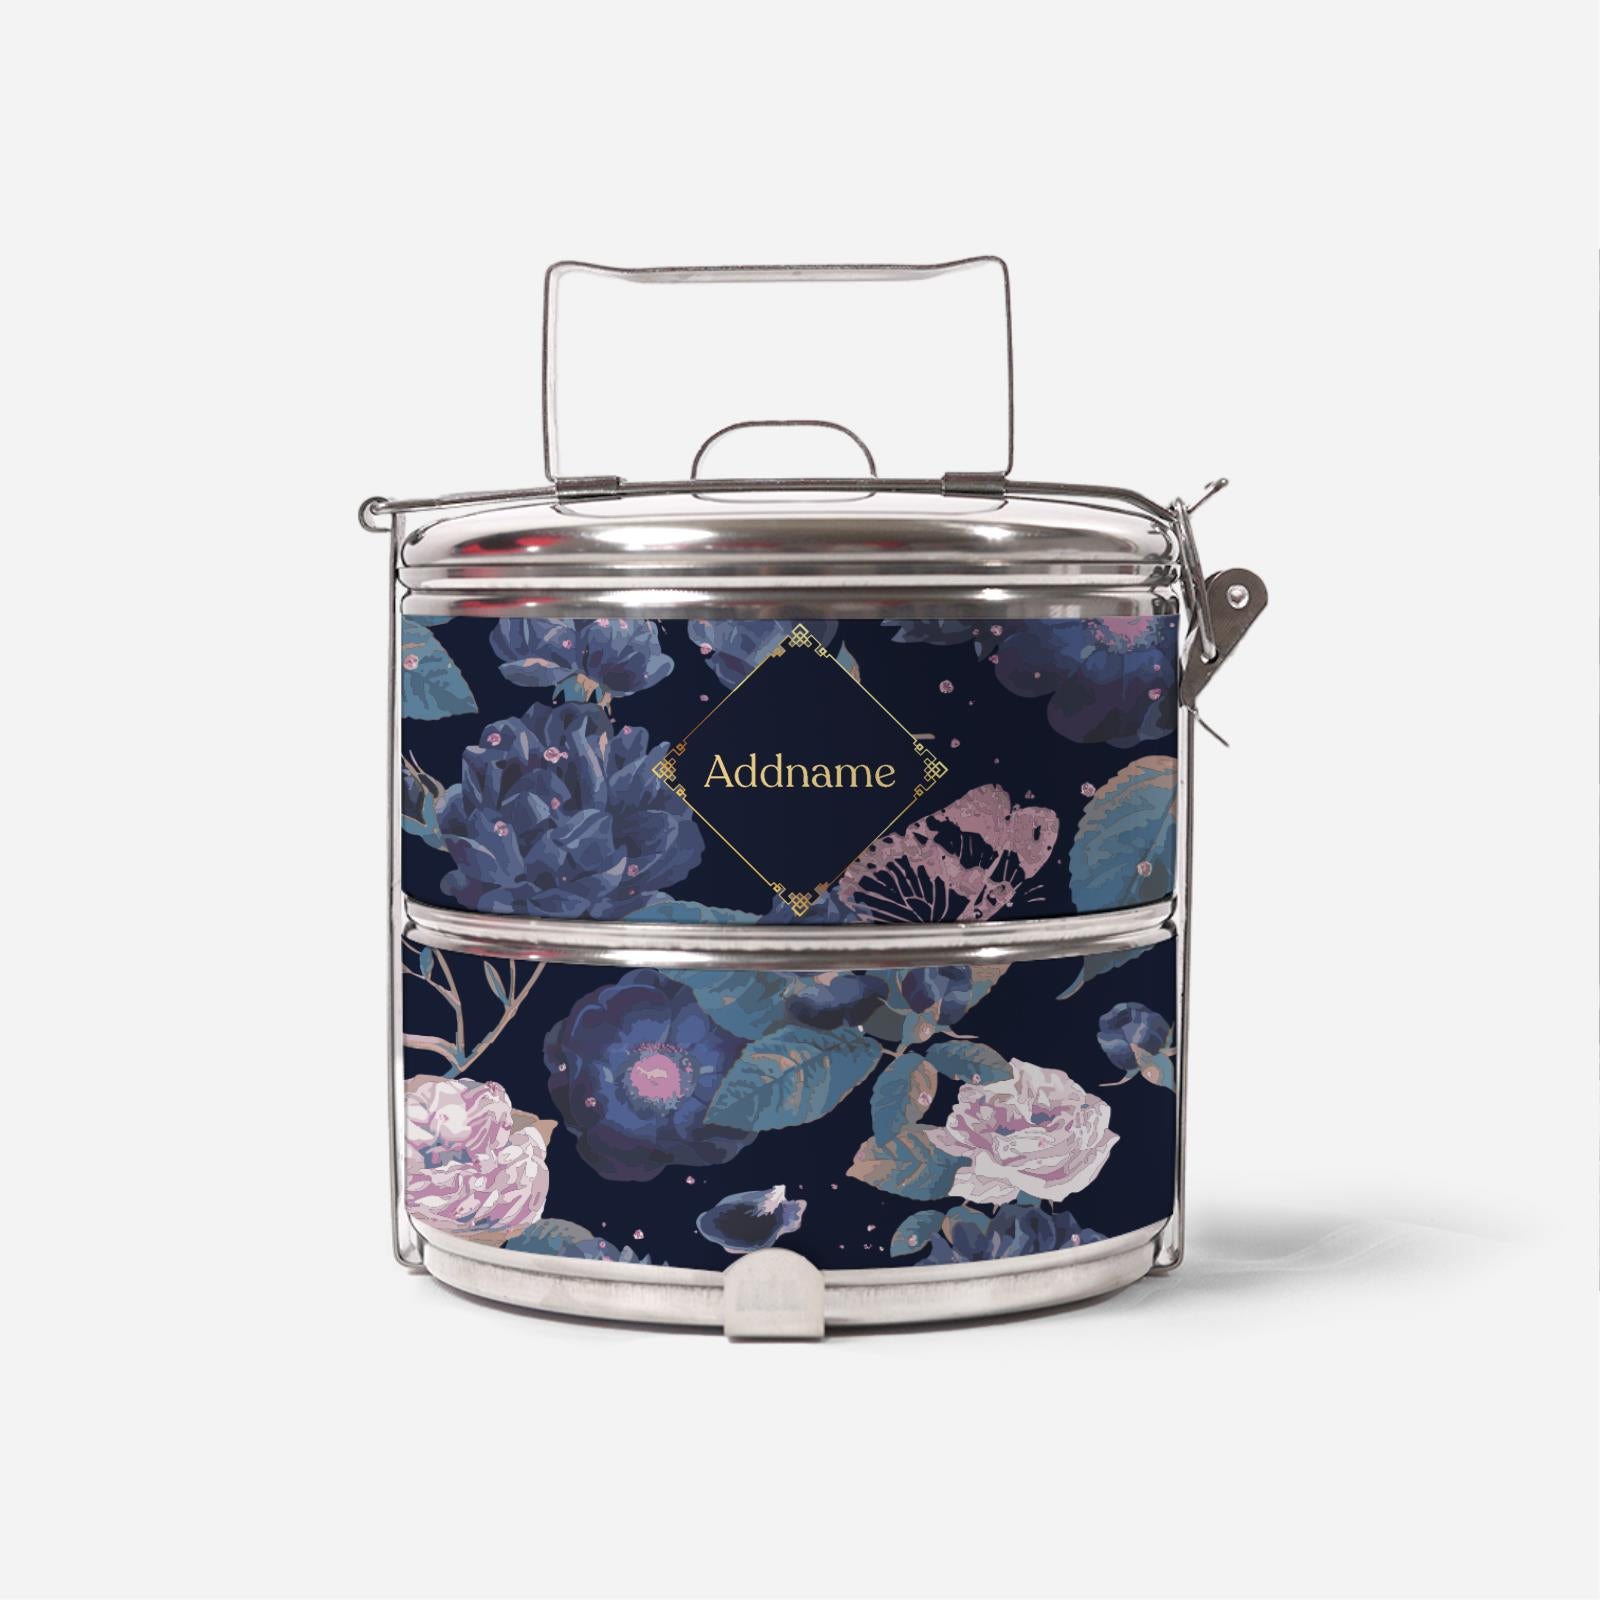 Royal Floral Series With English Personalization Two Tier Standard Tiffin Carrier - Serene Moonlight